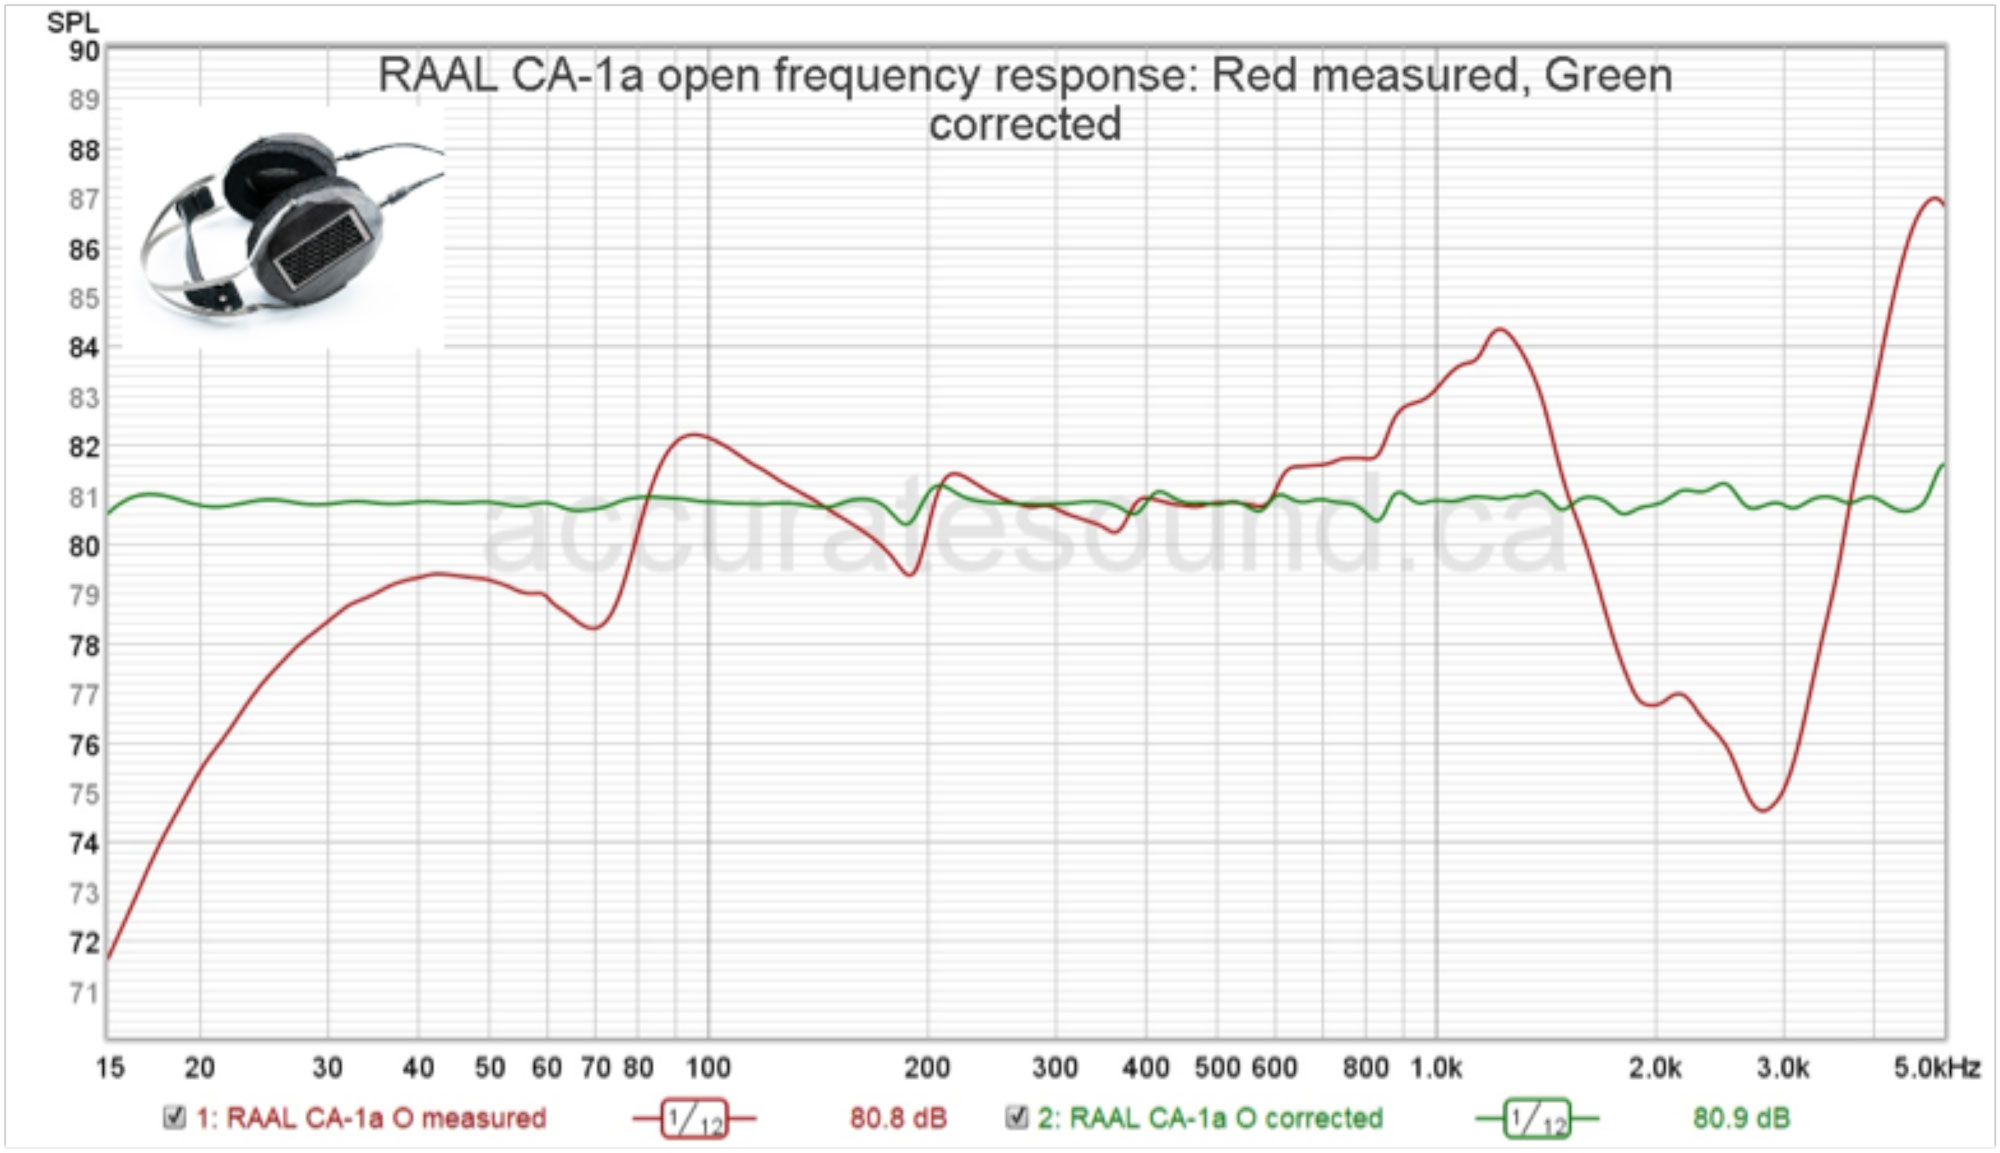 RAAL requisite CA-1a open frequency